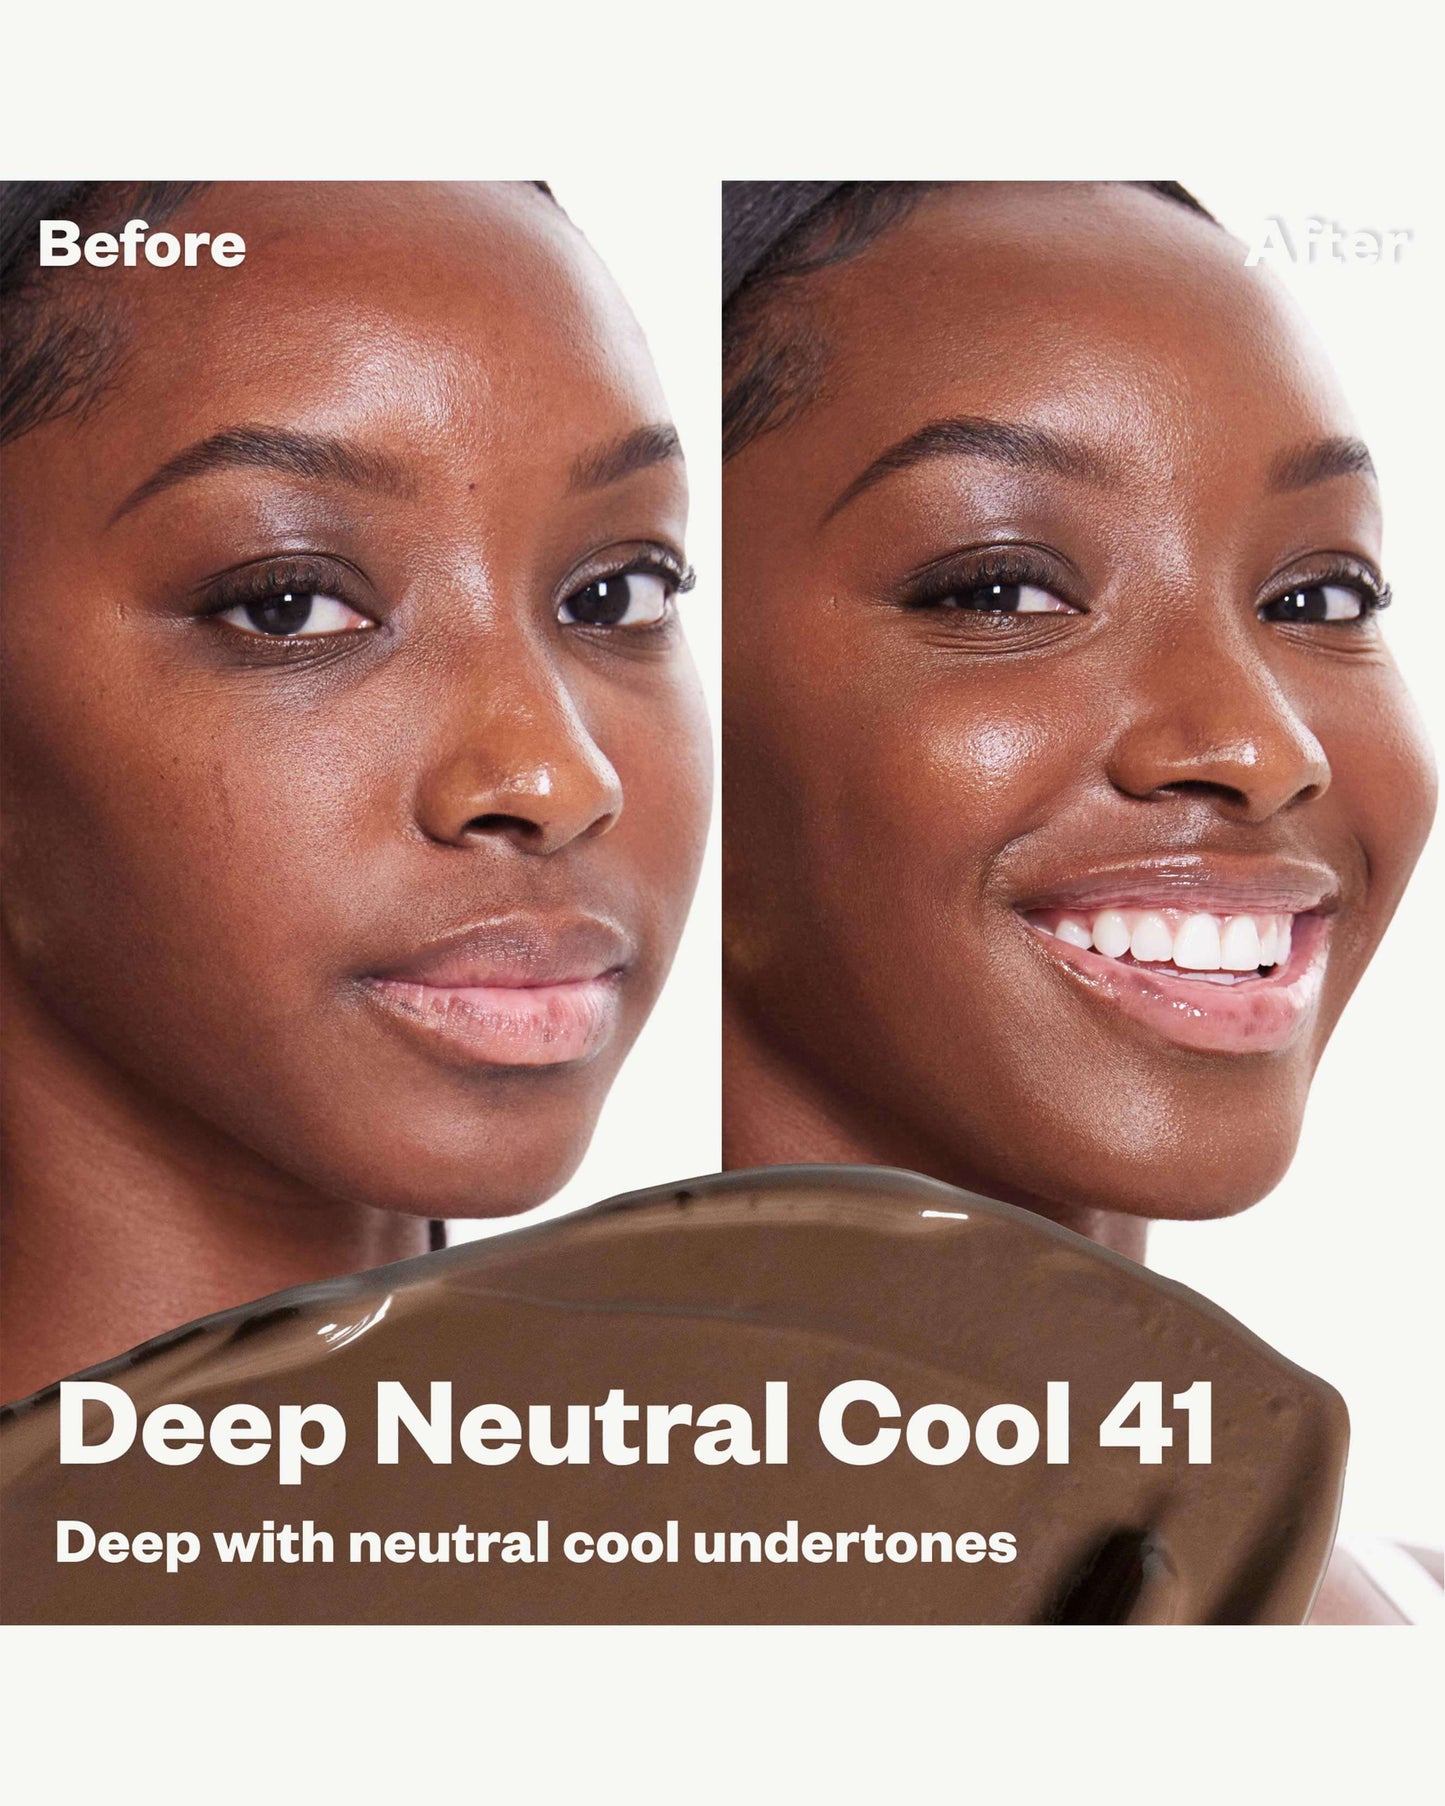 41 NC (deep with neutral cool undertones)